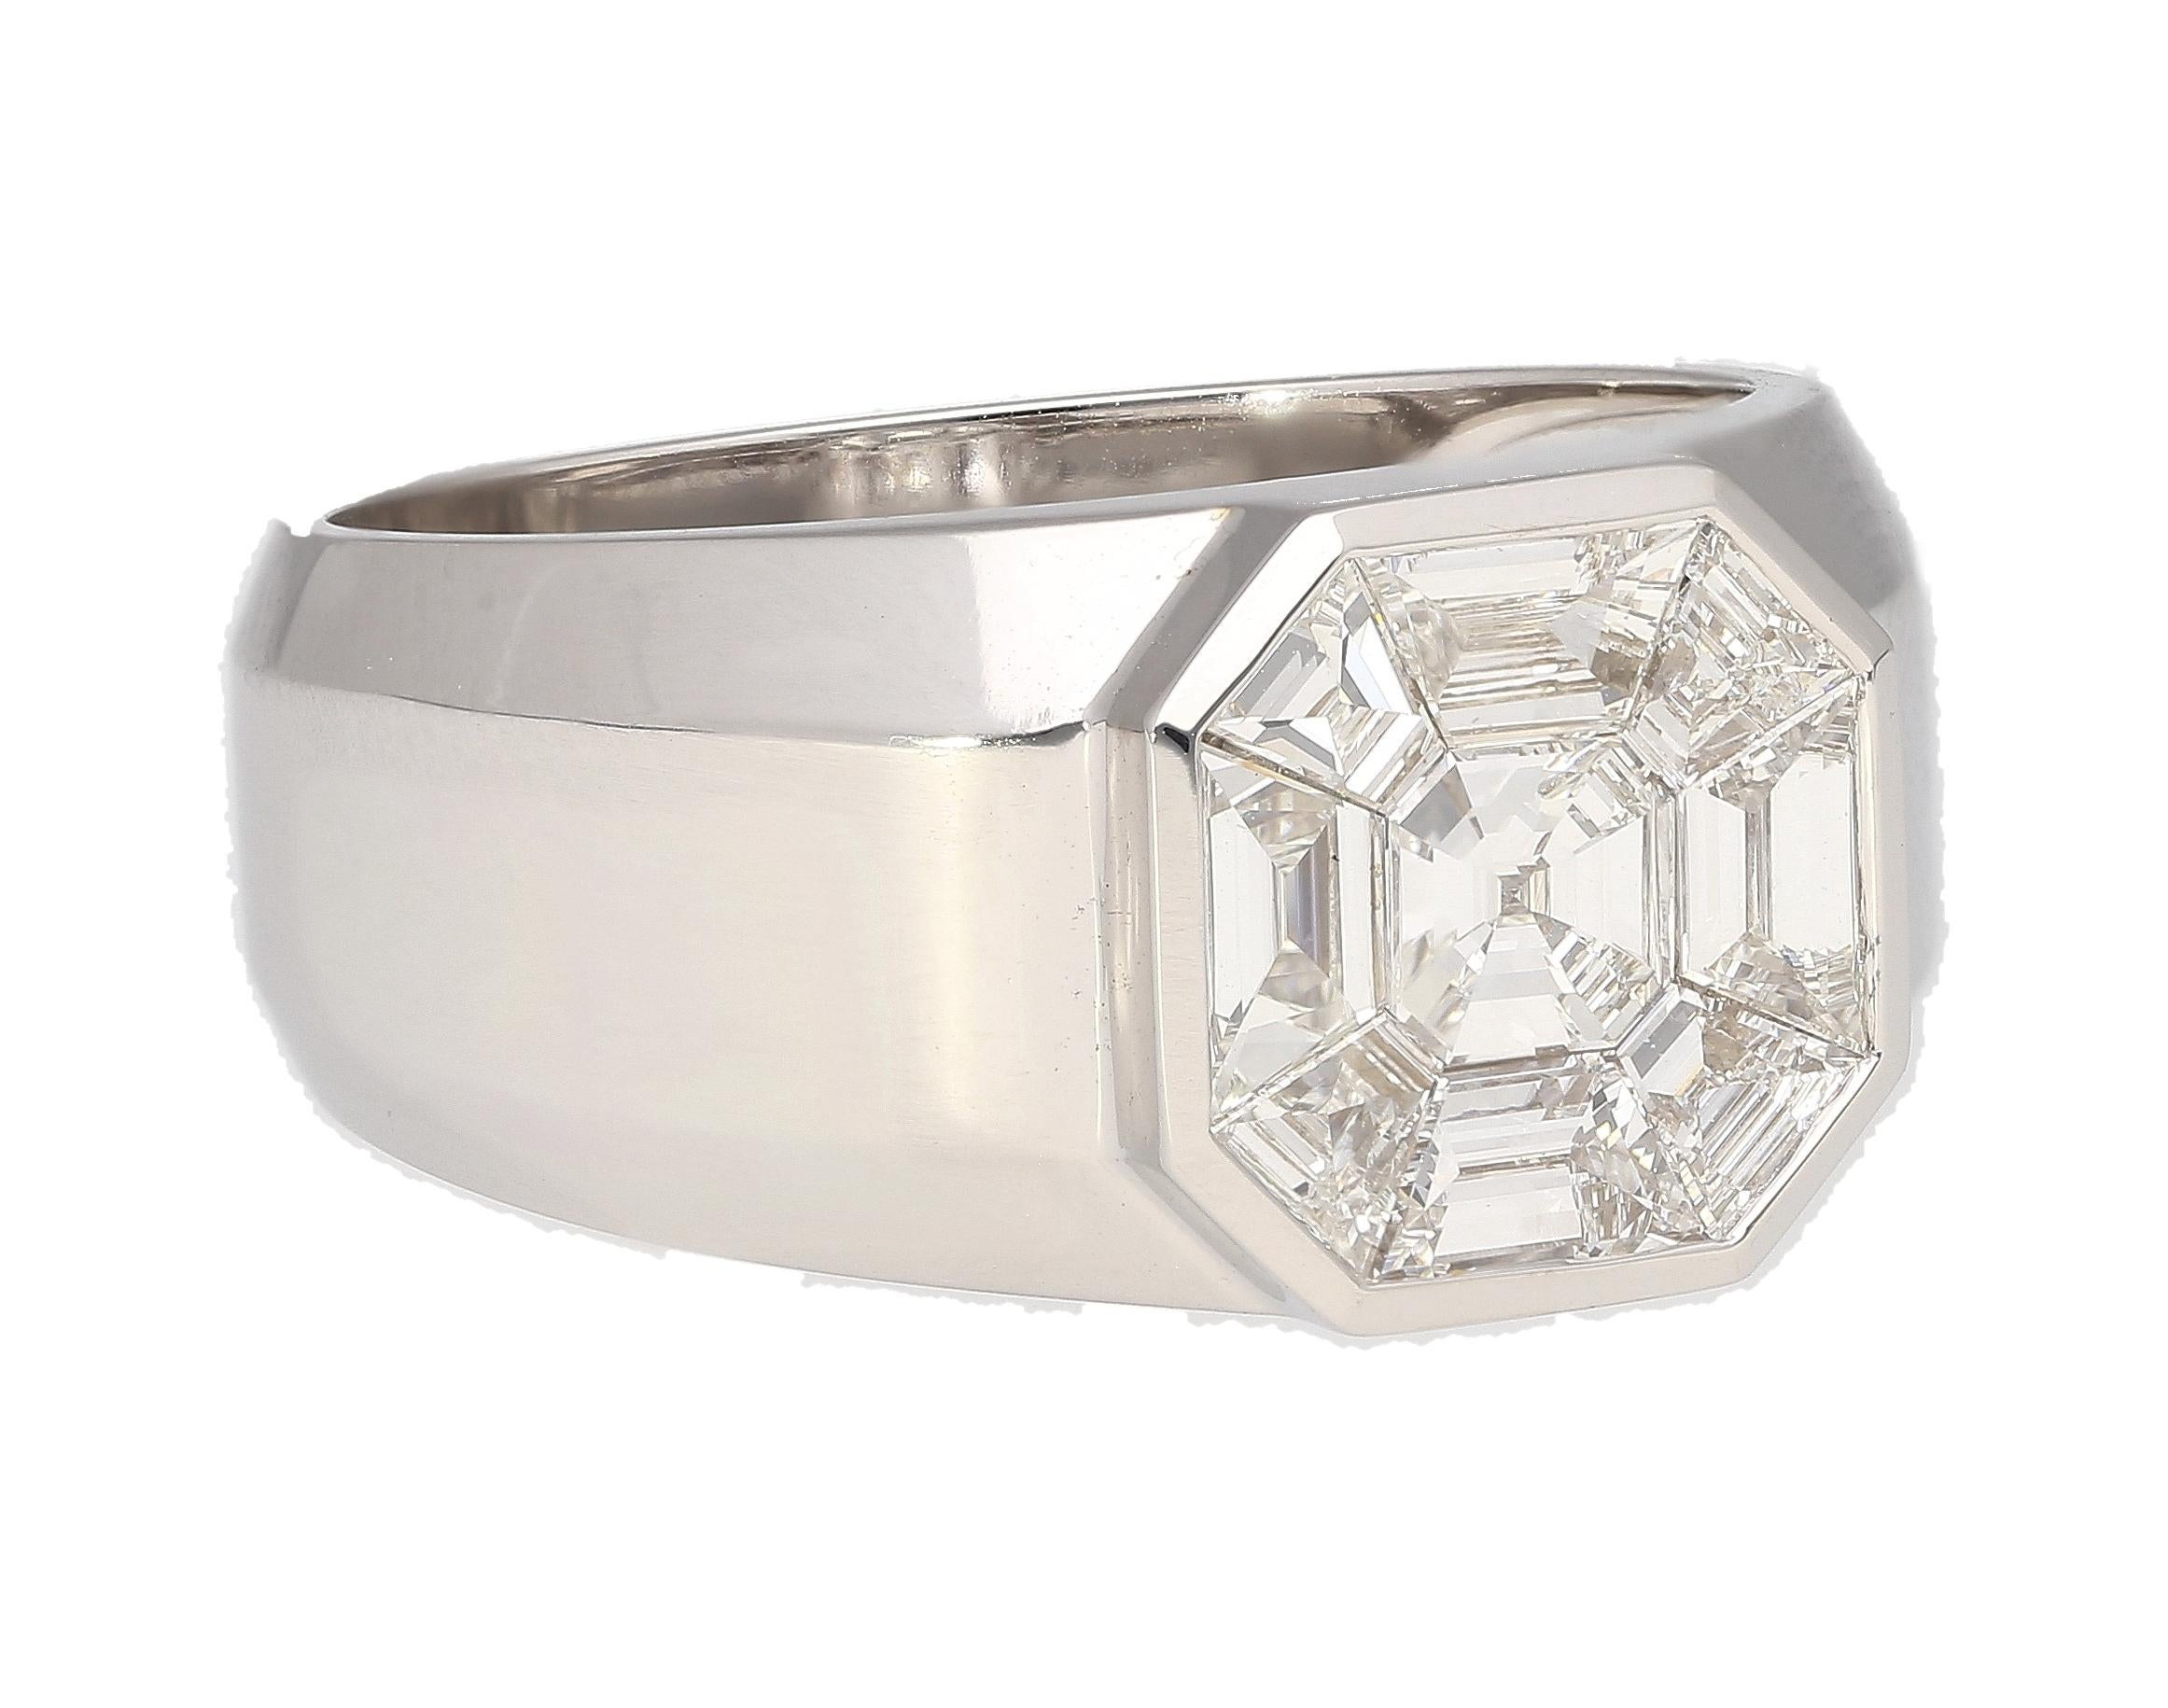 Men's curved shank natural diamond cluster ring, featuring 9 assorted mixed cut Trapezoid and Asscher cut natural diamonds. Boasting an Asscher cut center stone, with 8 trapezoid cut side stones. Set in buttery smooth 18 karat white gold.

The